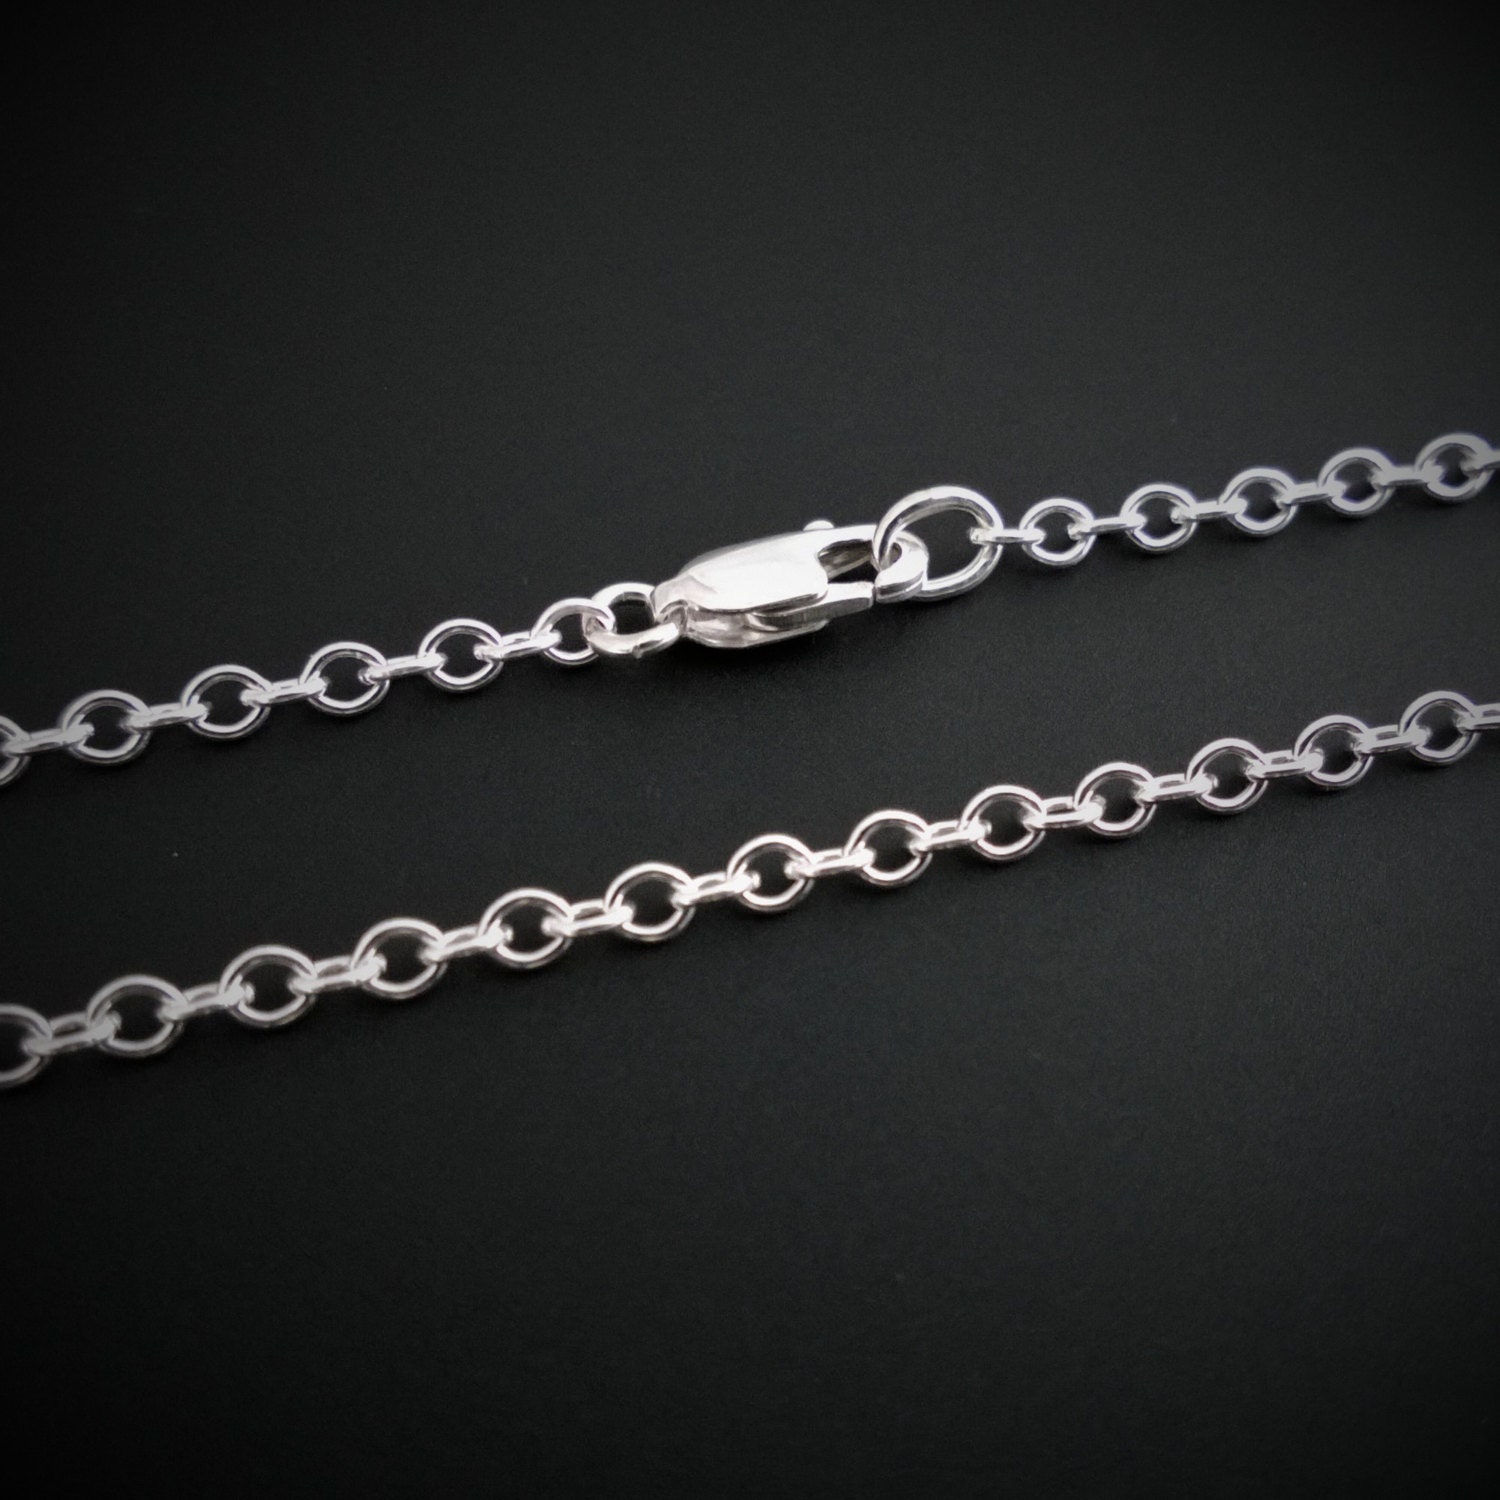 20 Inch Sterling Silver Cable Chain Necklace Silver Chain